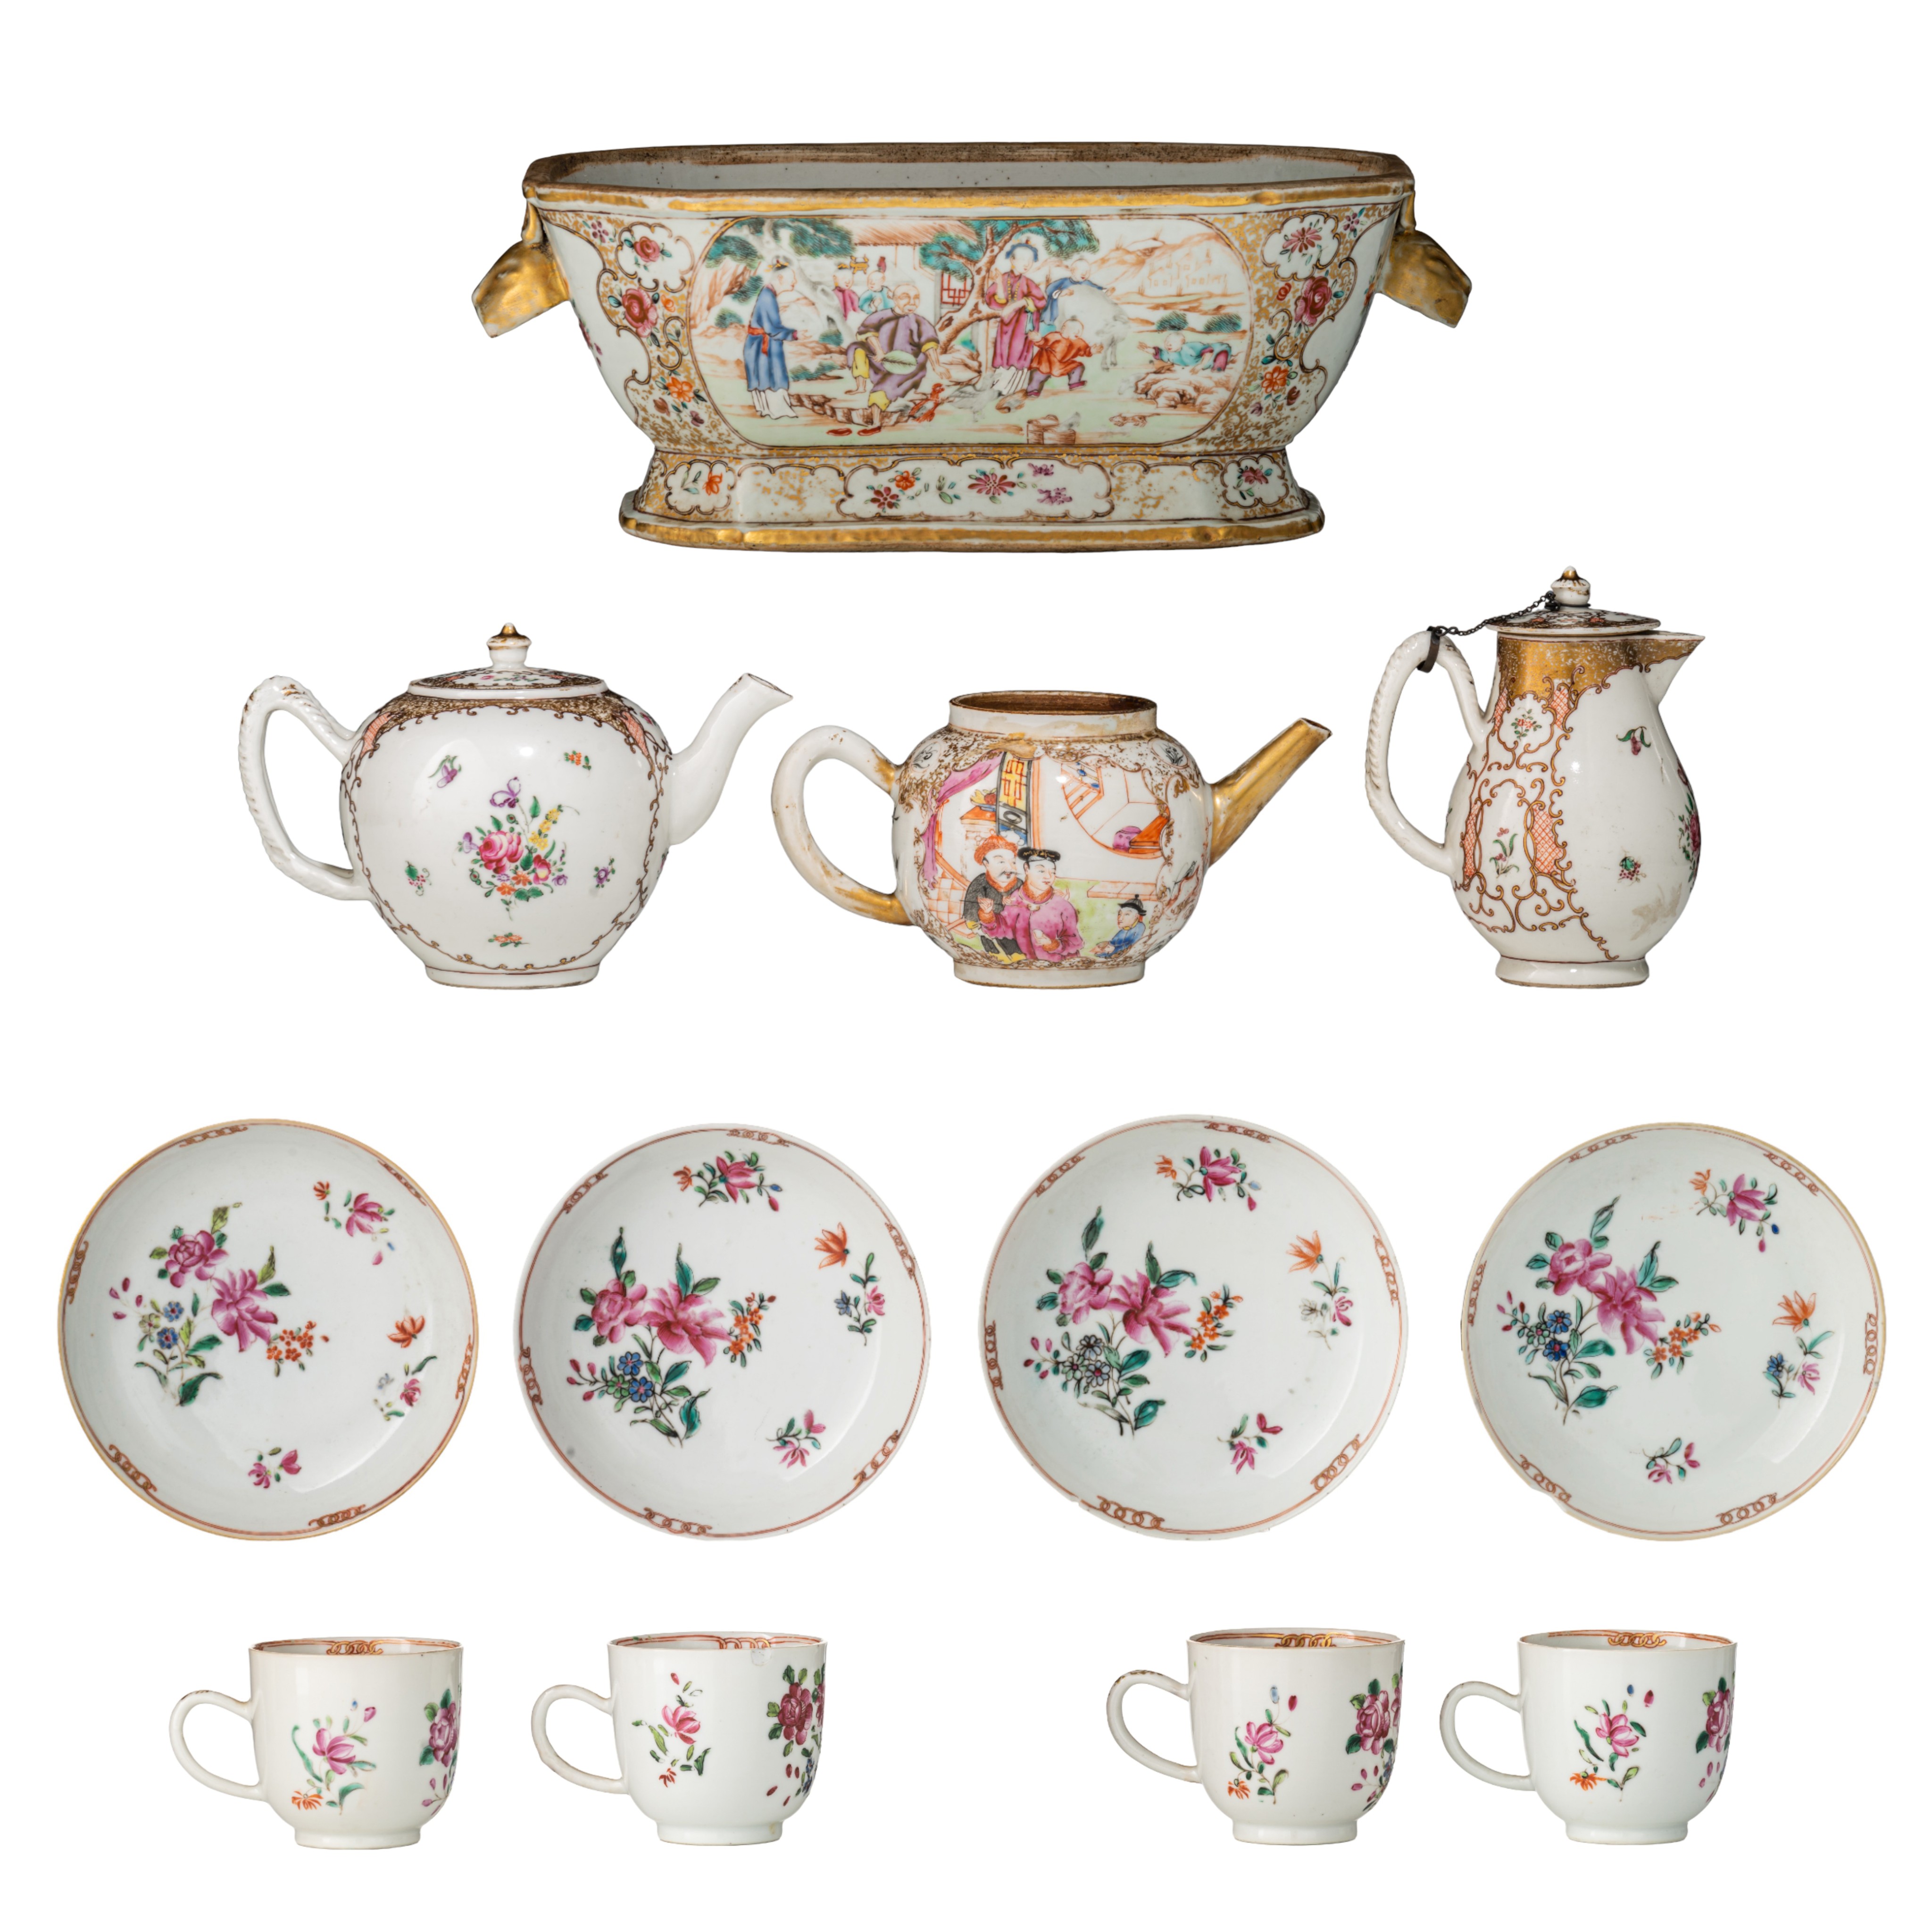 A collection of famille rose and gilt decorated export porcelain ware, 18thC, largest - H 12,5 - 34,